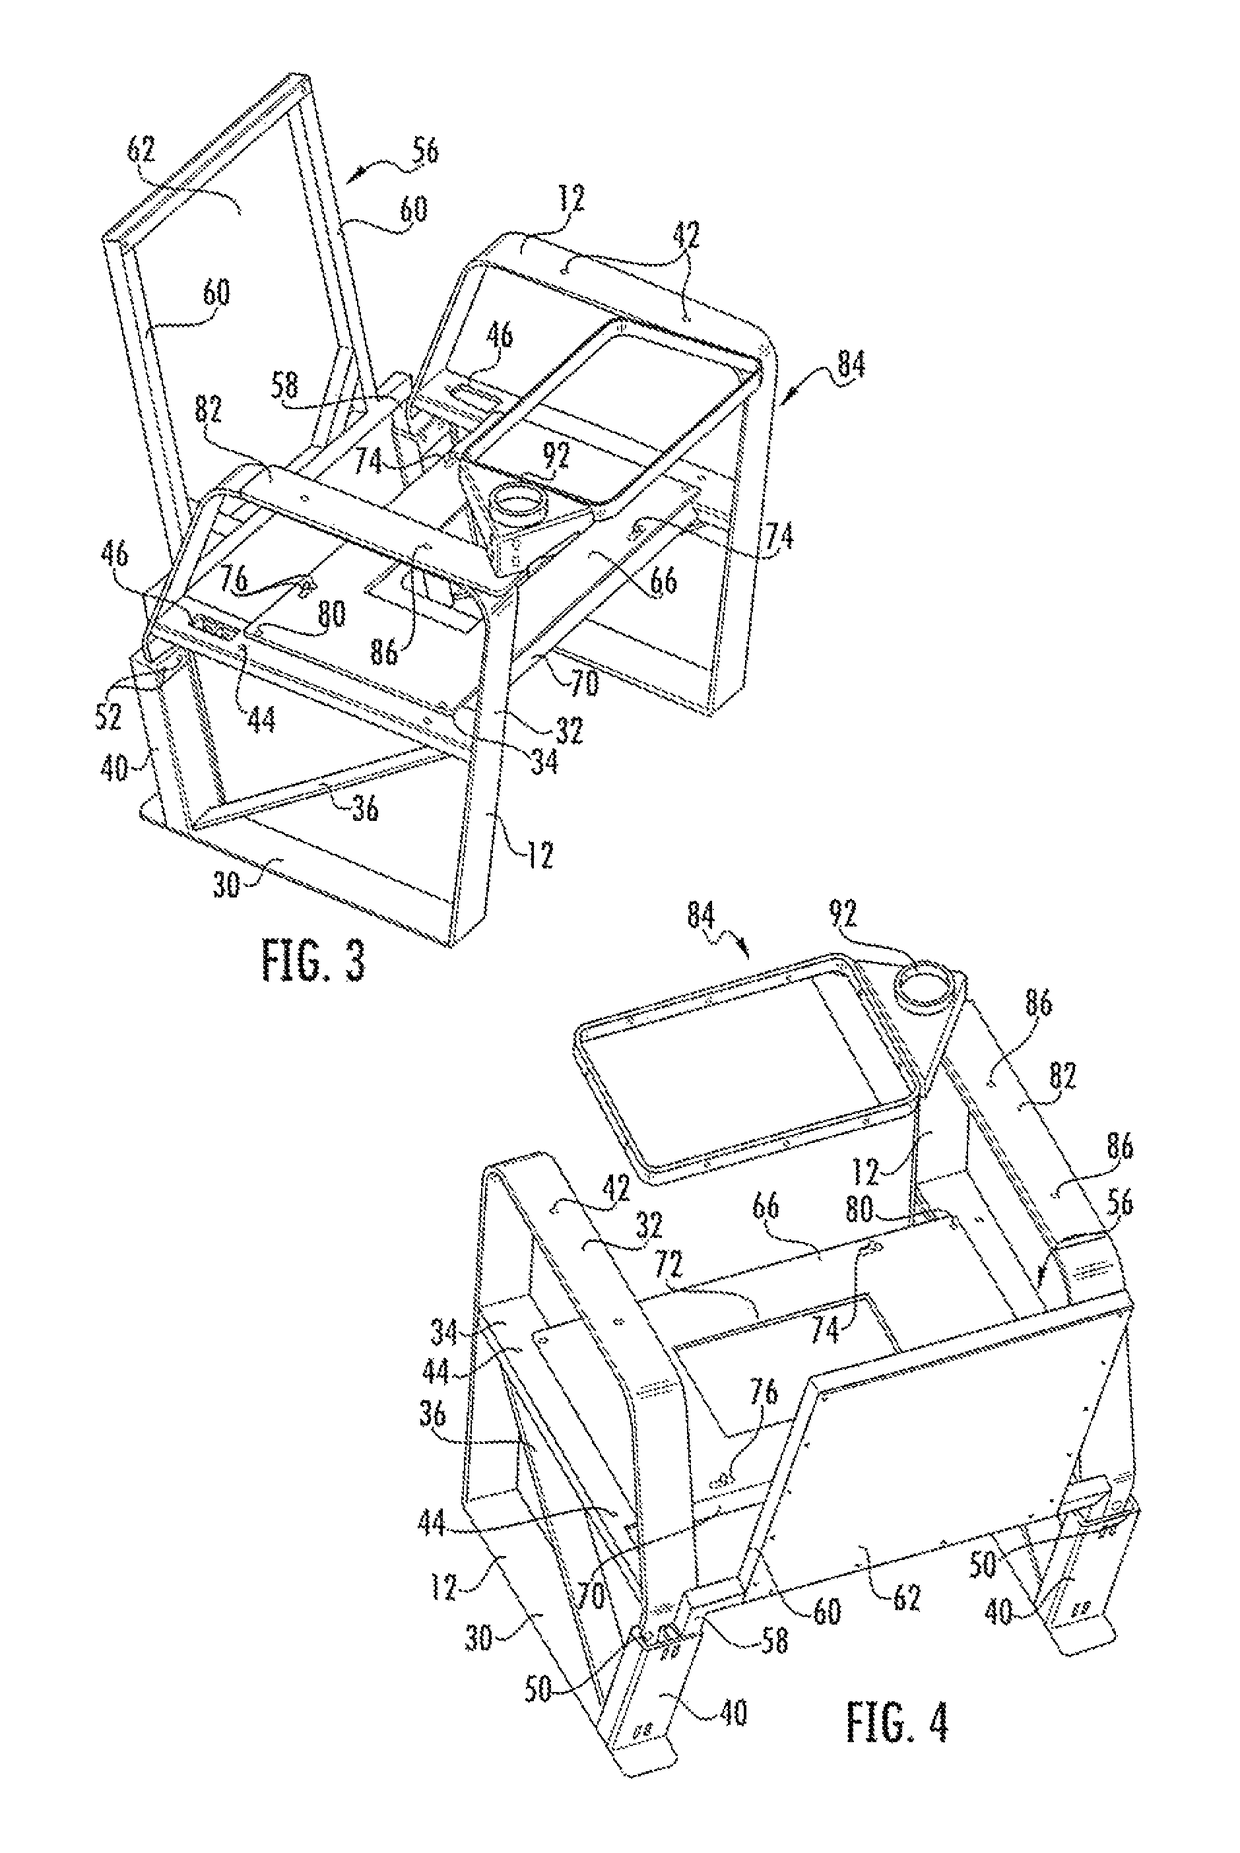 Portable, modular seating system and related methods